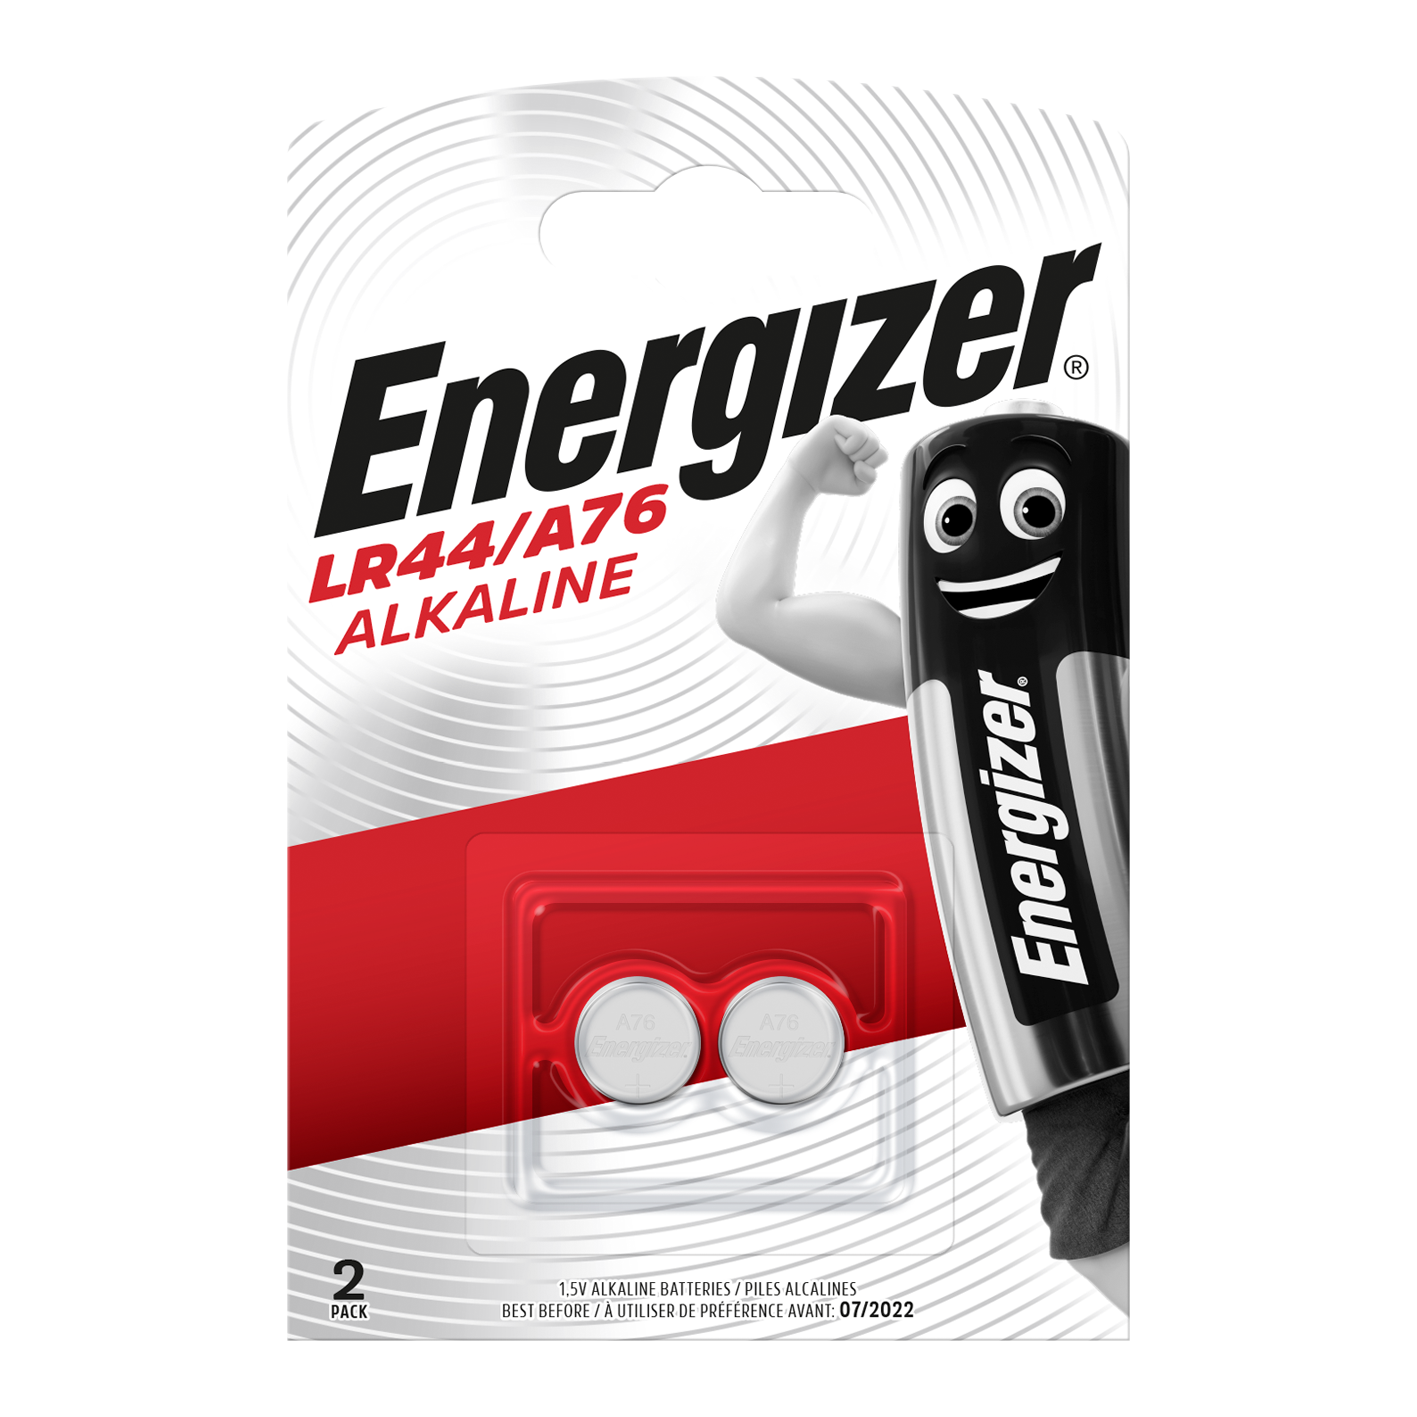 Energizer LR44/A76 Alkaline Coin Cell, Pack of 2